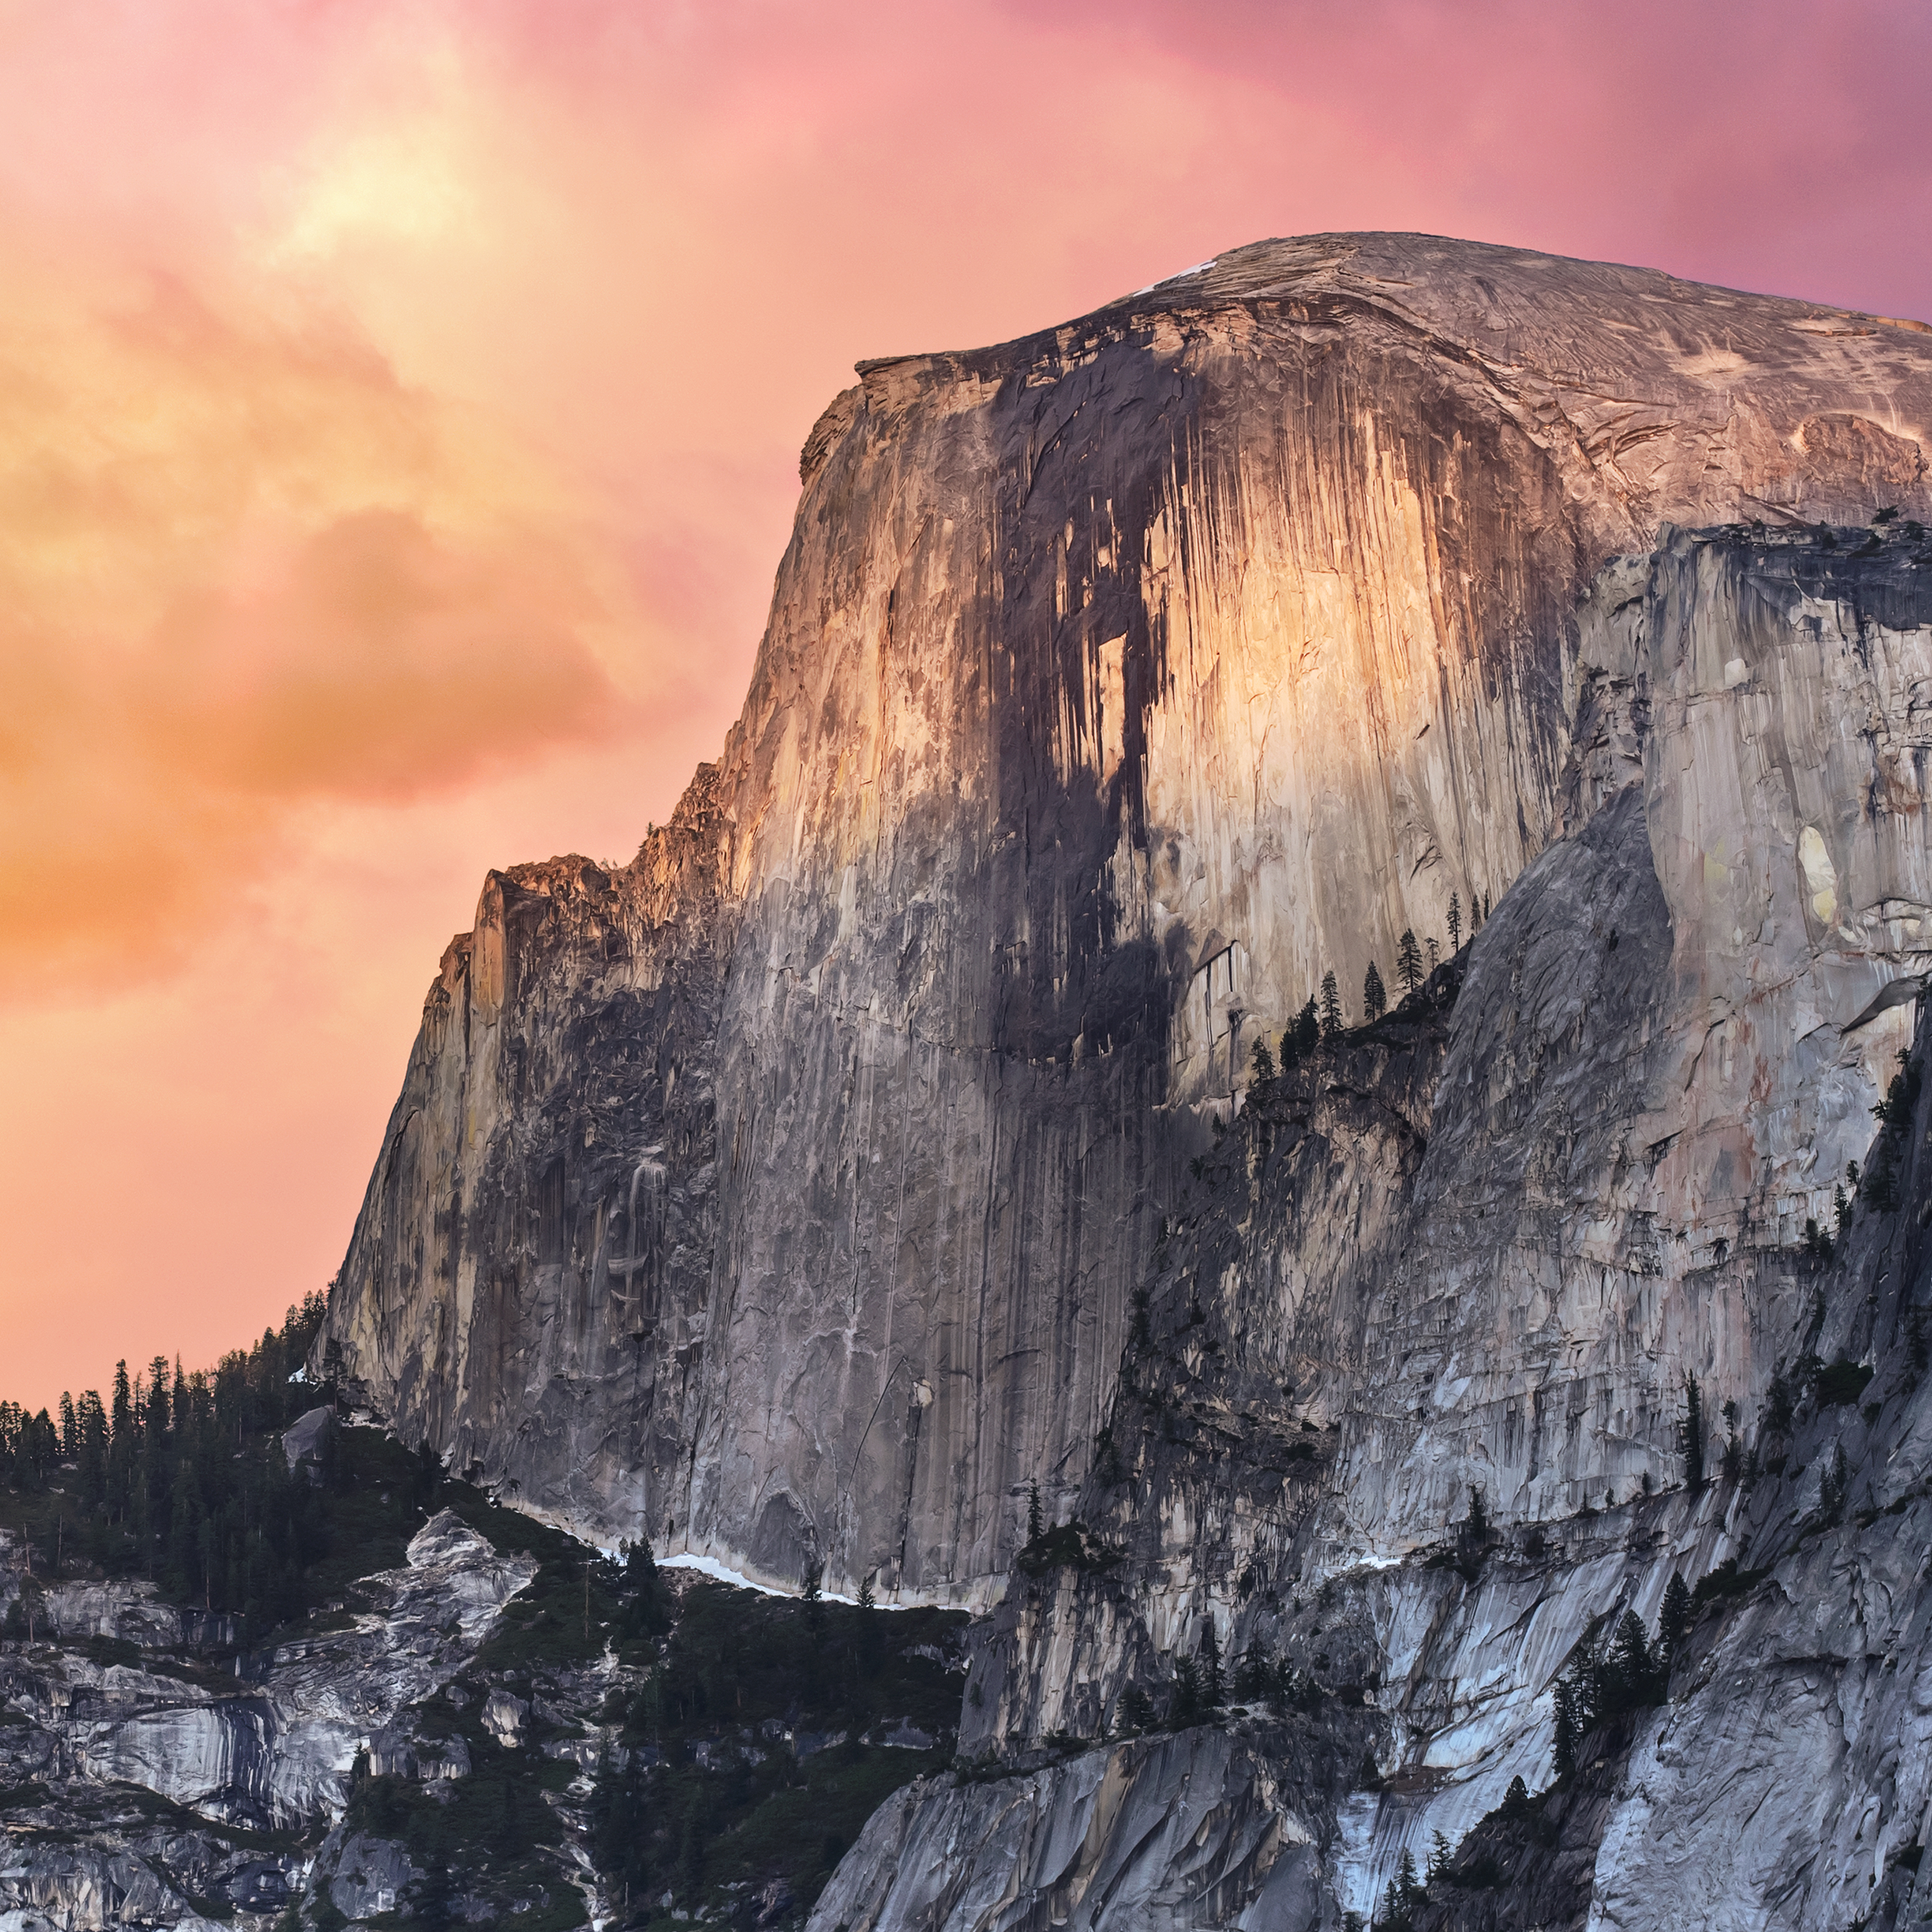 The Ios And Os X Yosemite Wallpaper